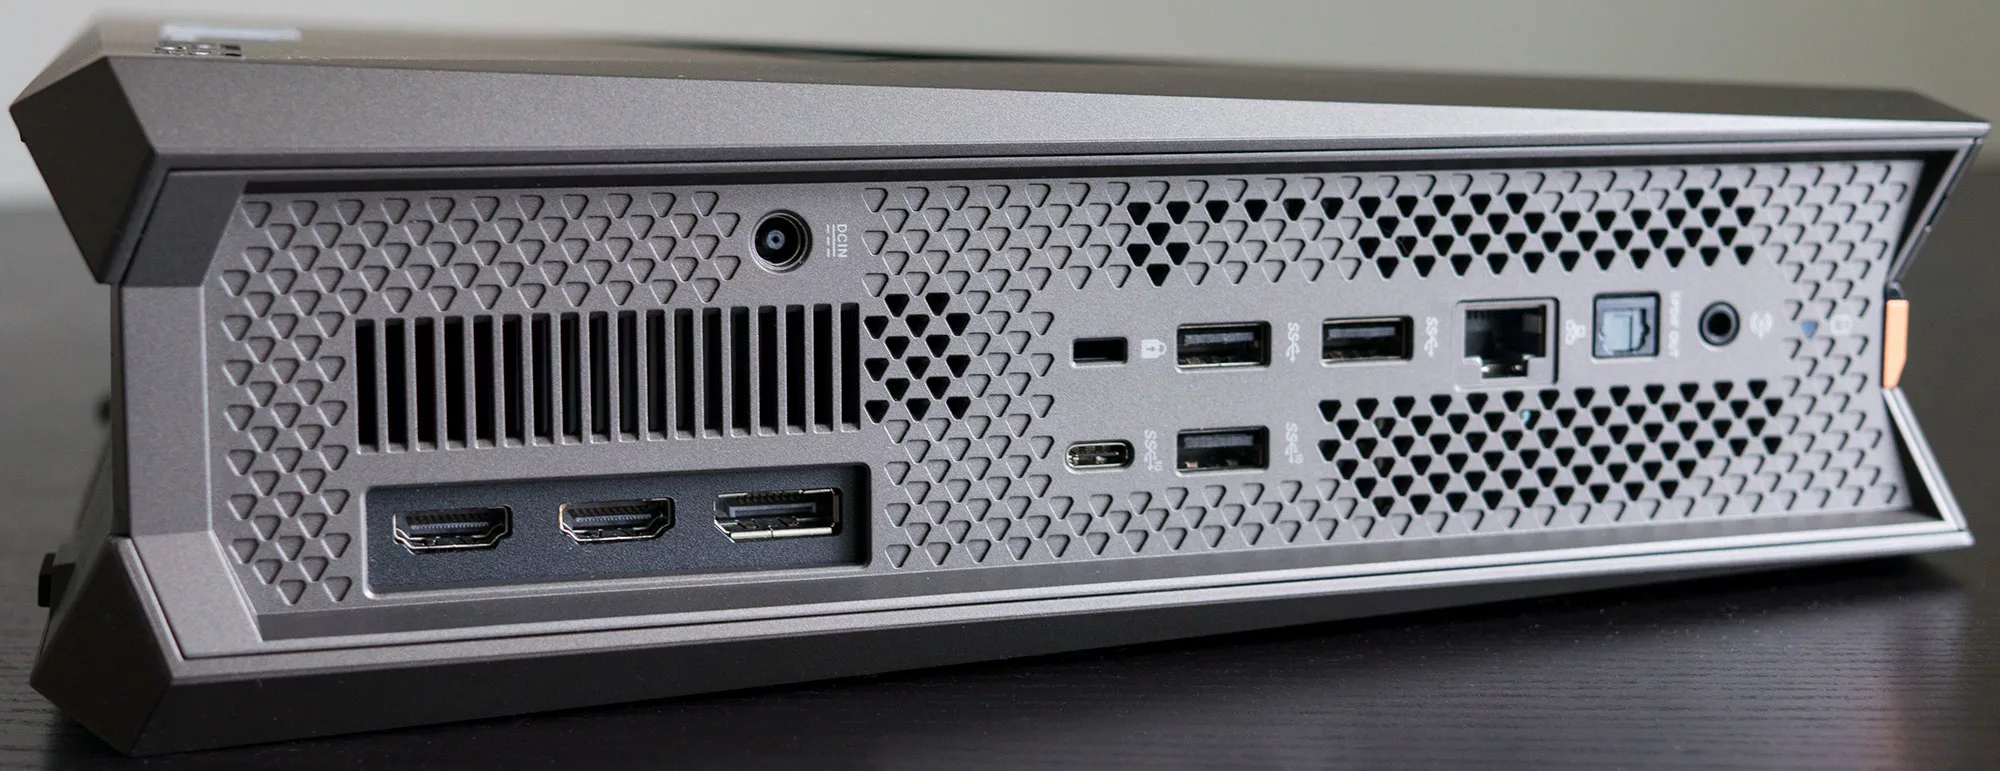 The GR8 II desktop console-sized PC gaming anywhere | - Republic of Gamers Global